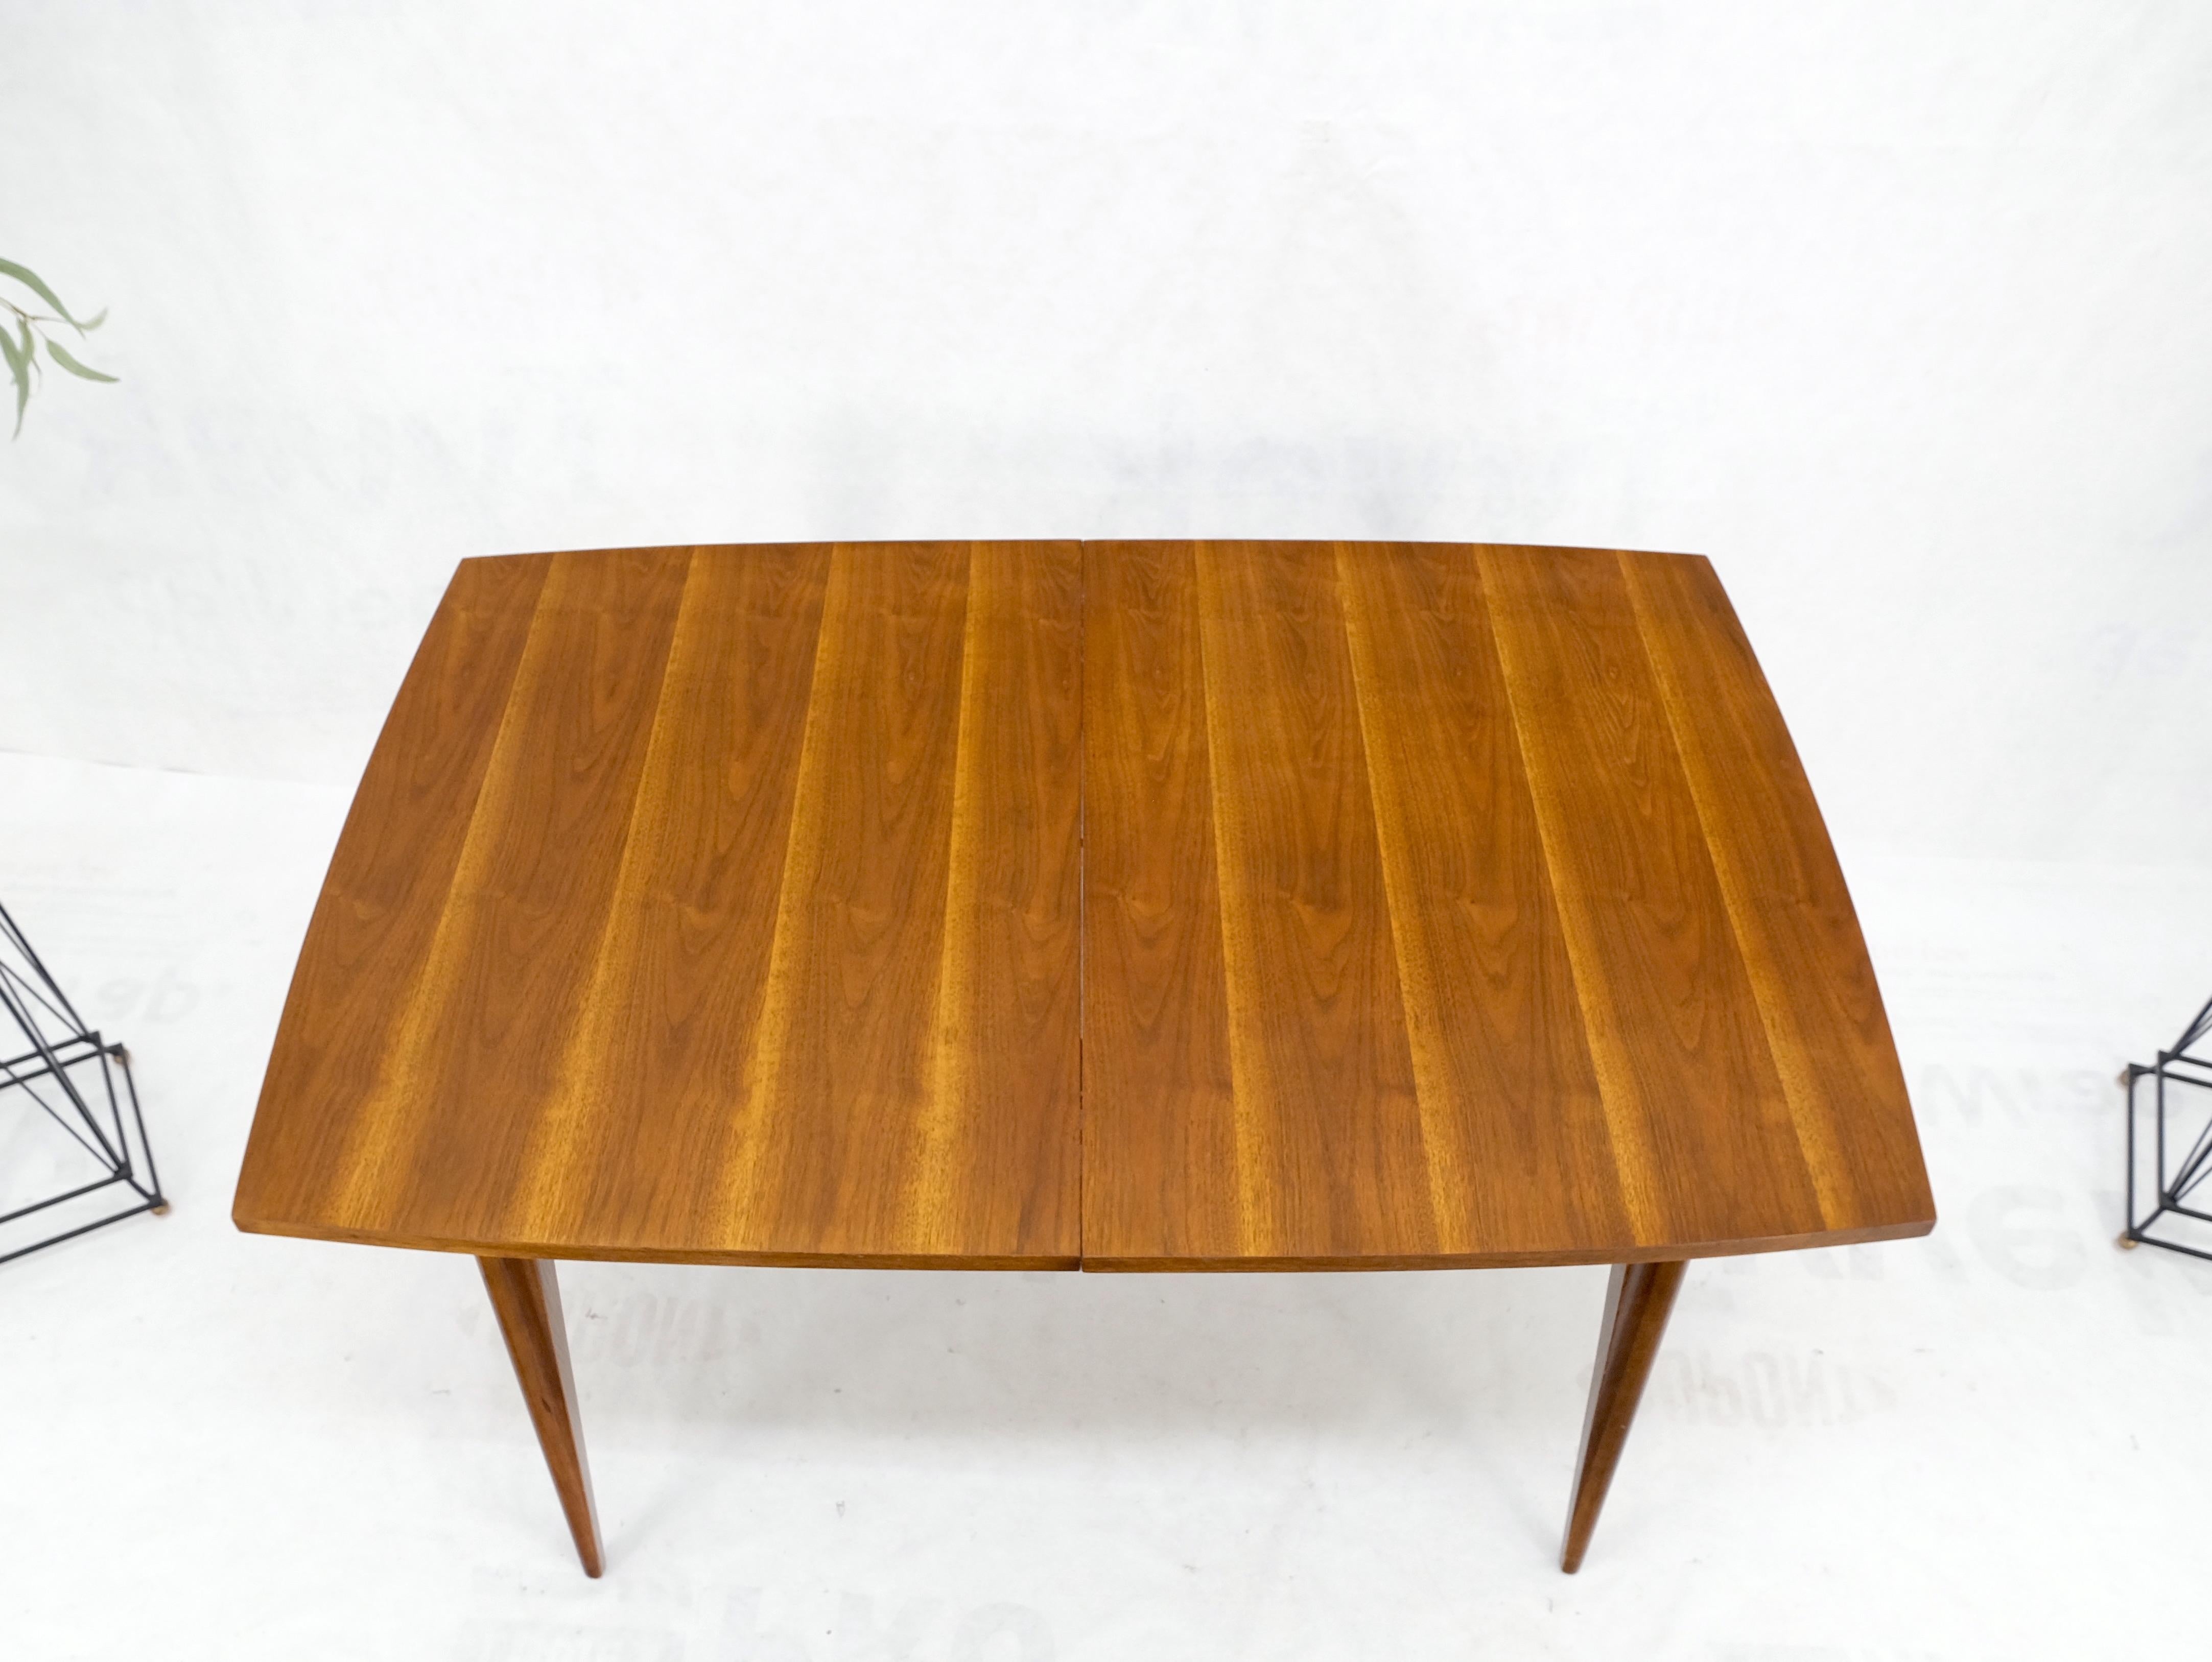 Danish American Mid-Century Modern walnut boat shape dining table 1 leaf mint!
Extension leaf 12 inches across.

Measure: total length: 72 inches across.